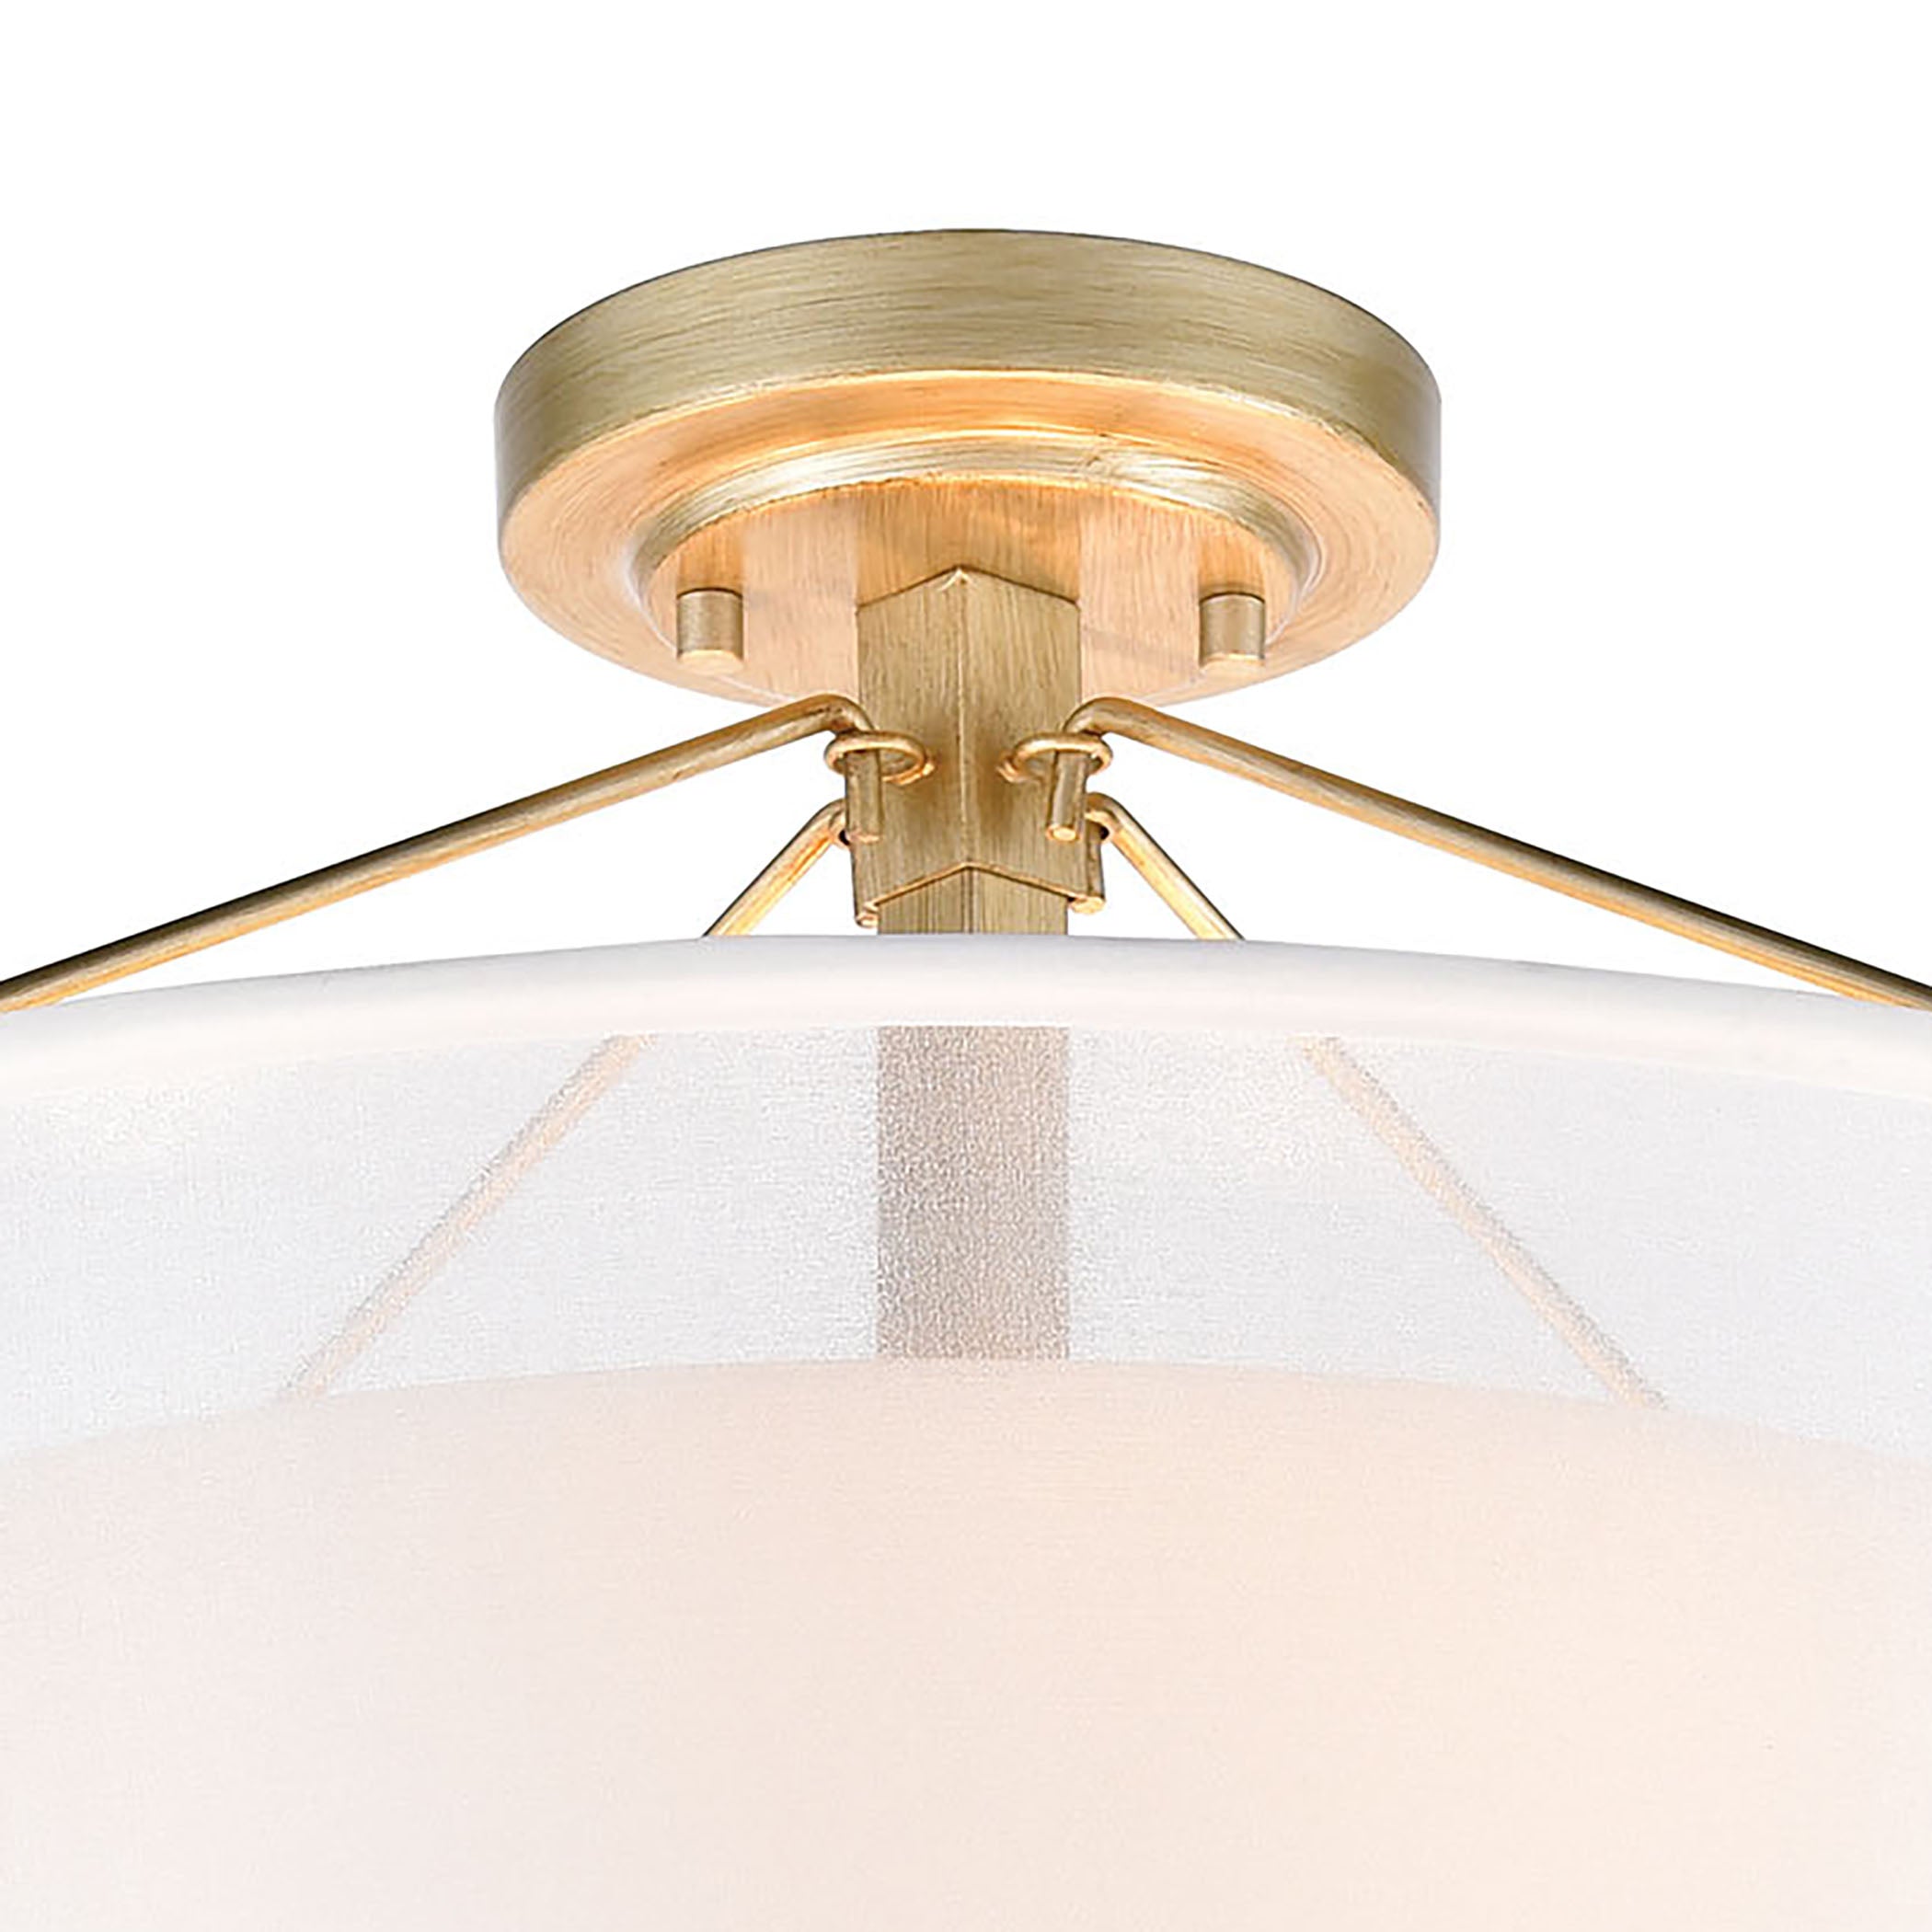 ELK Lighting 57034/3 Diffusion 3-Light Semi Flush Mount in Aged Silver with Frosted Glass Inside Silver Organza Shade